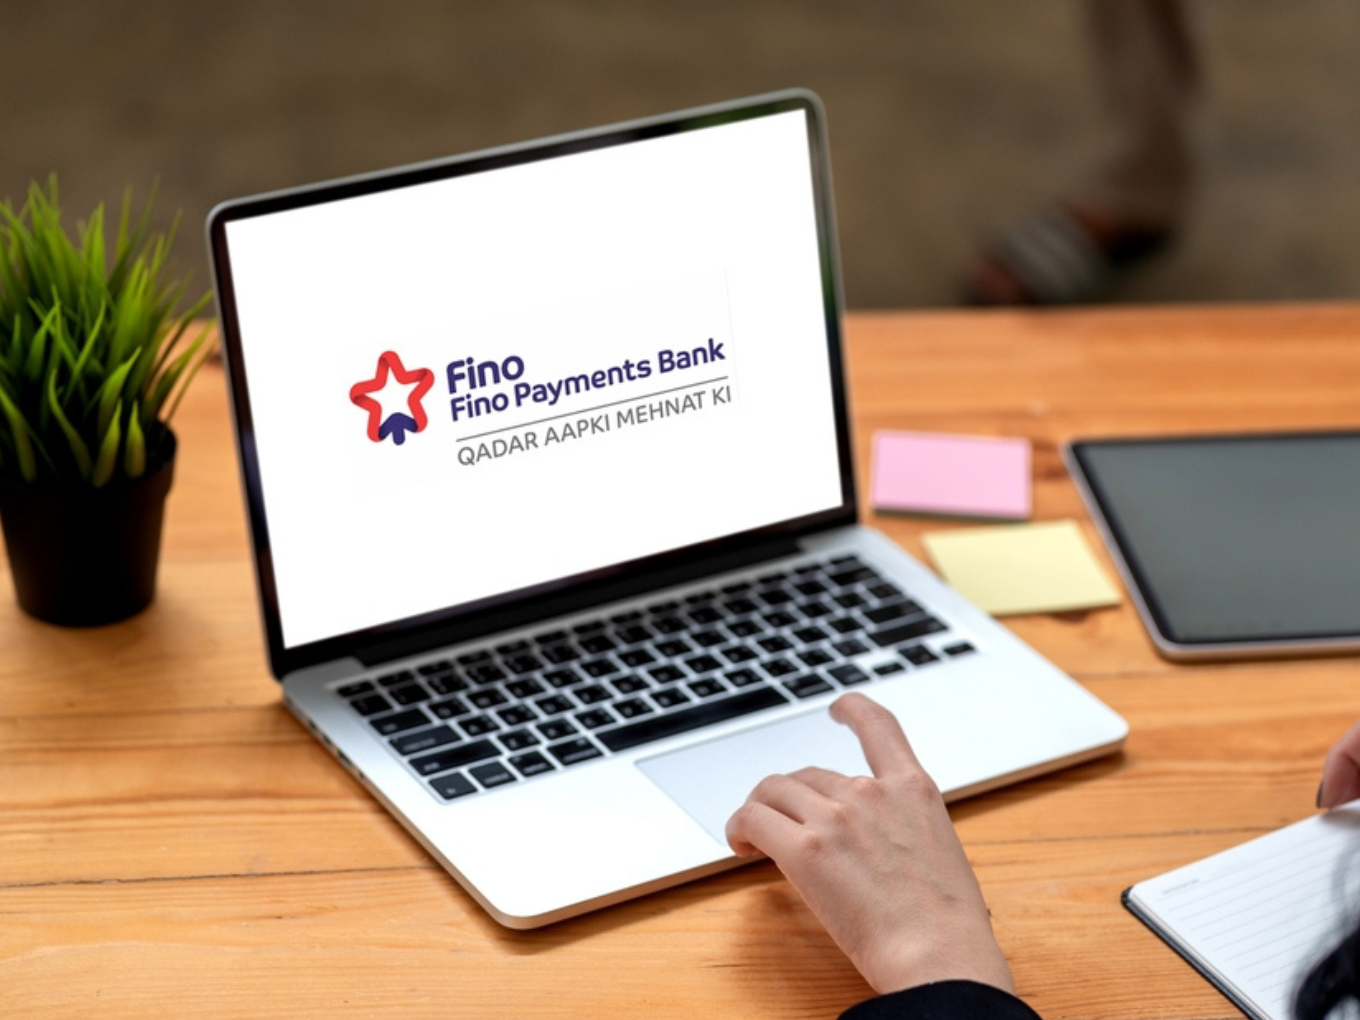 Fino announces Rs 1,200 crore initial share sale; first payments bank to go  public